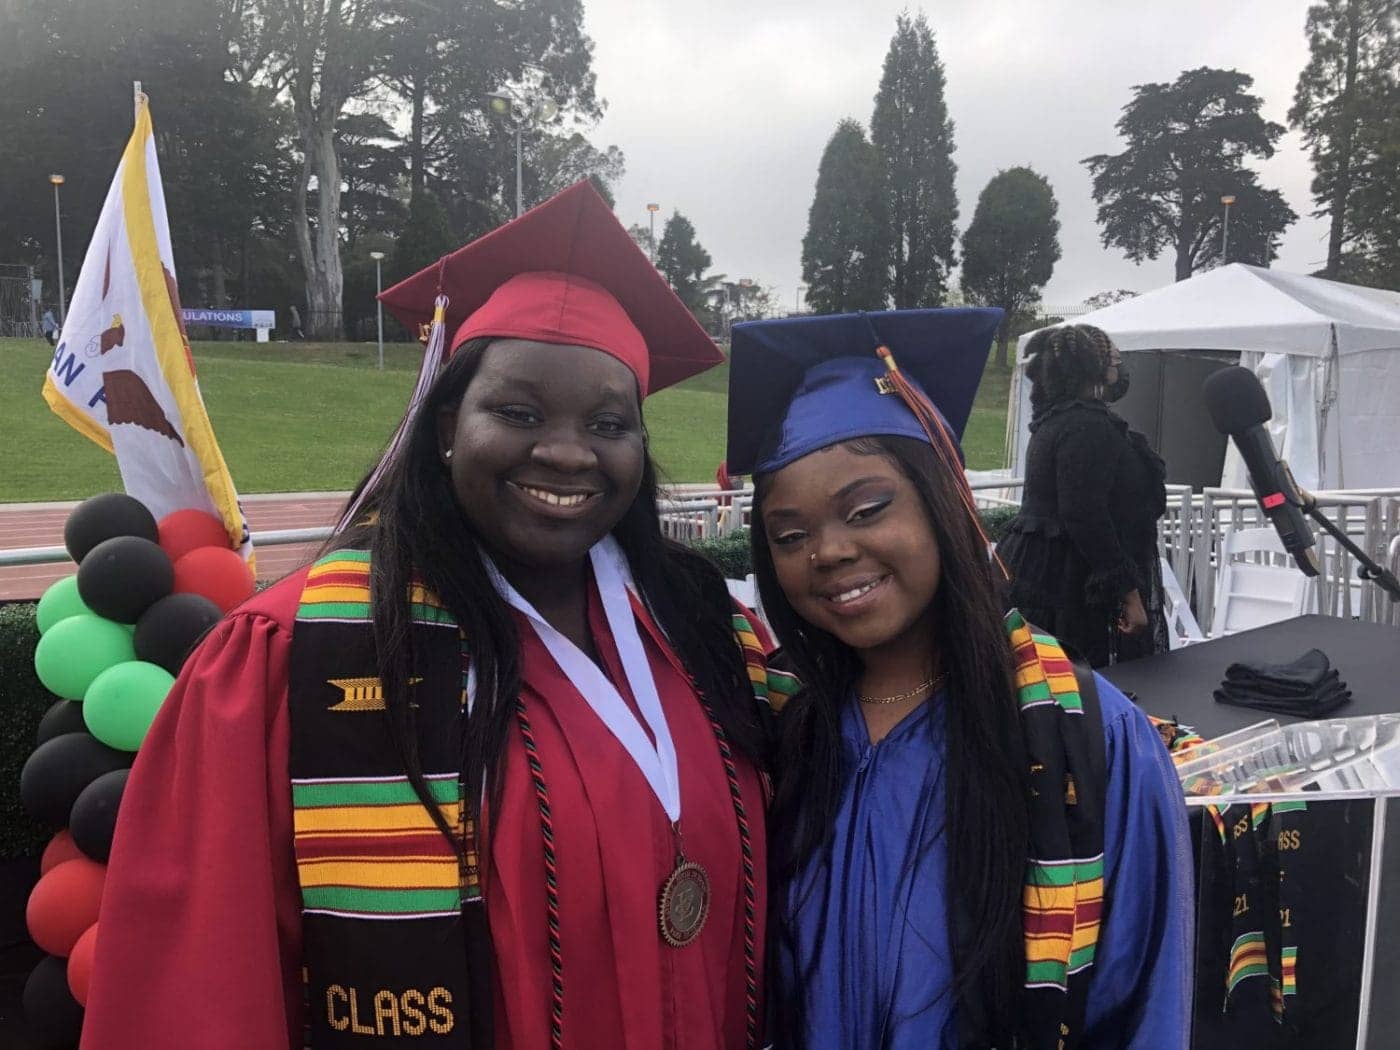 Shavonne-Hines-Foster-and-Serenity-Payne-Second-Annual-Black-Graduation-at-Kezar-Pavilion-Stadium-by-Daphne-Young-060421-1400x1050, Black graduates celebrate big at 2021 Rites of Passage ceremony!, Culture Currents 